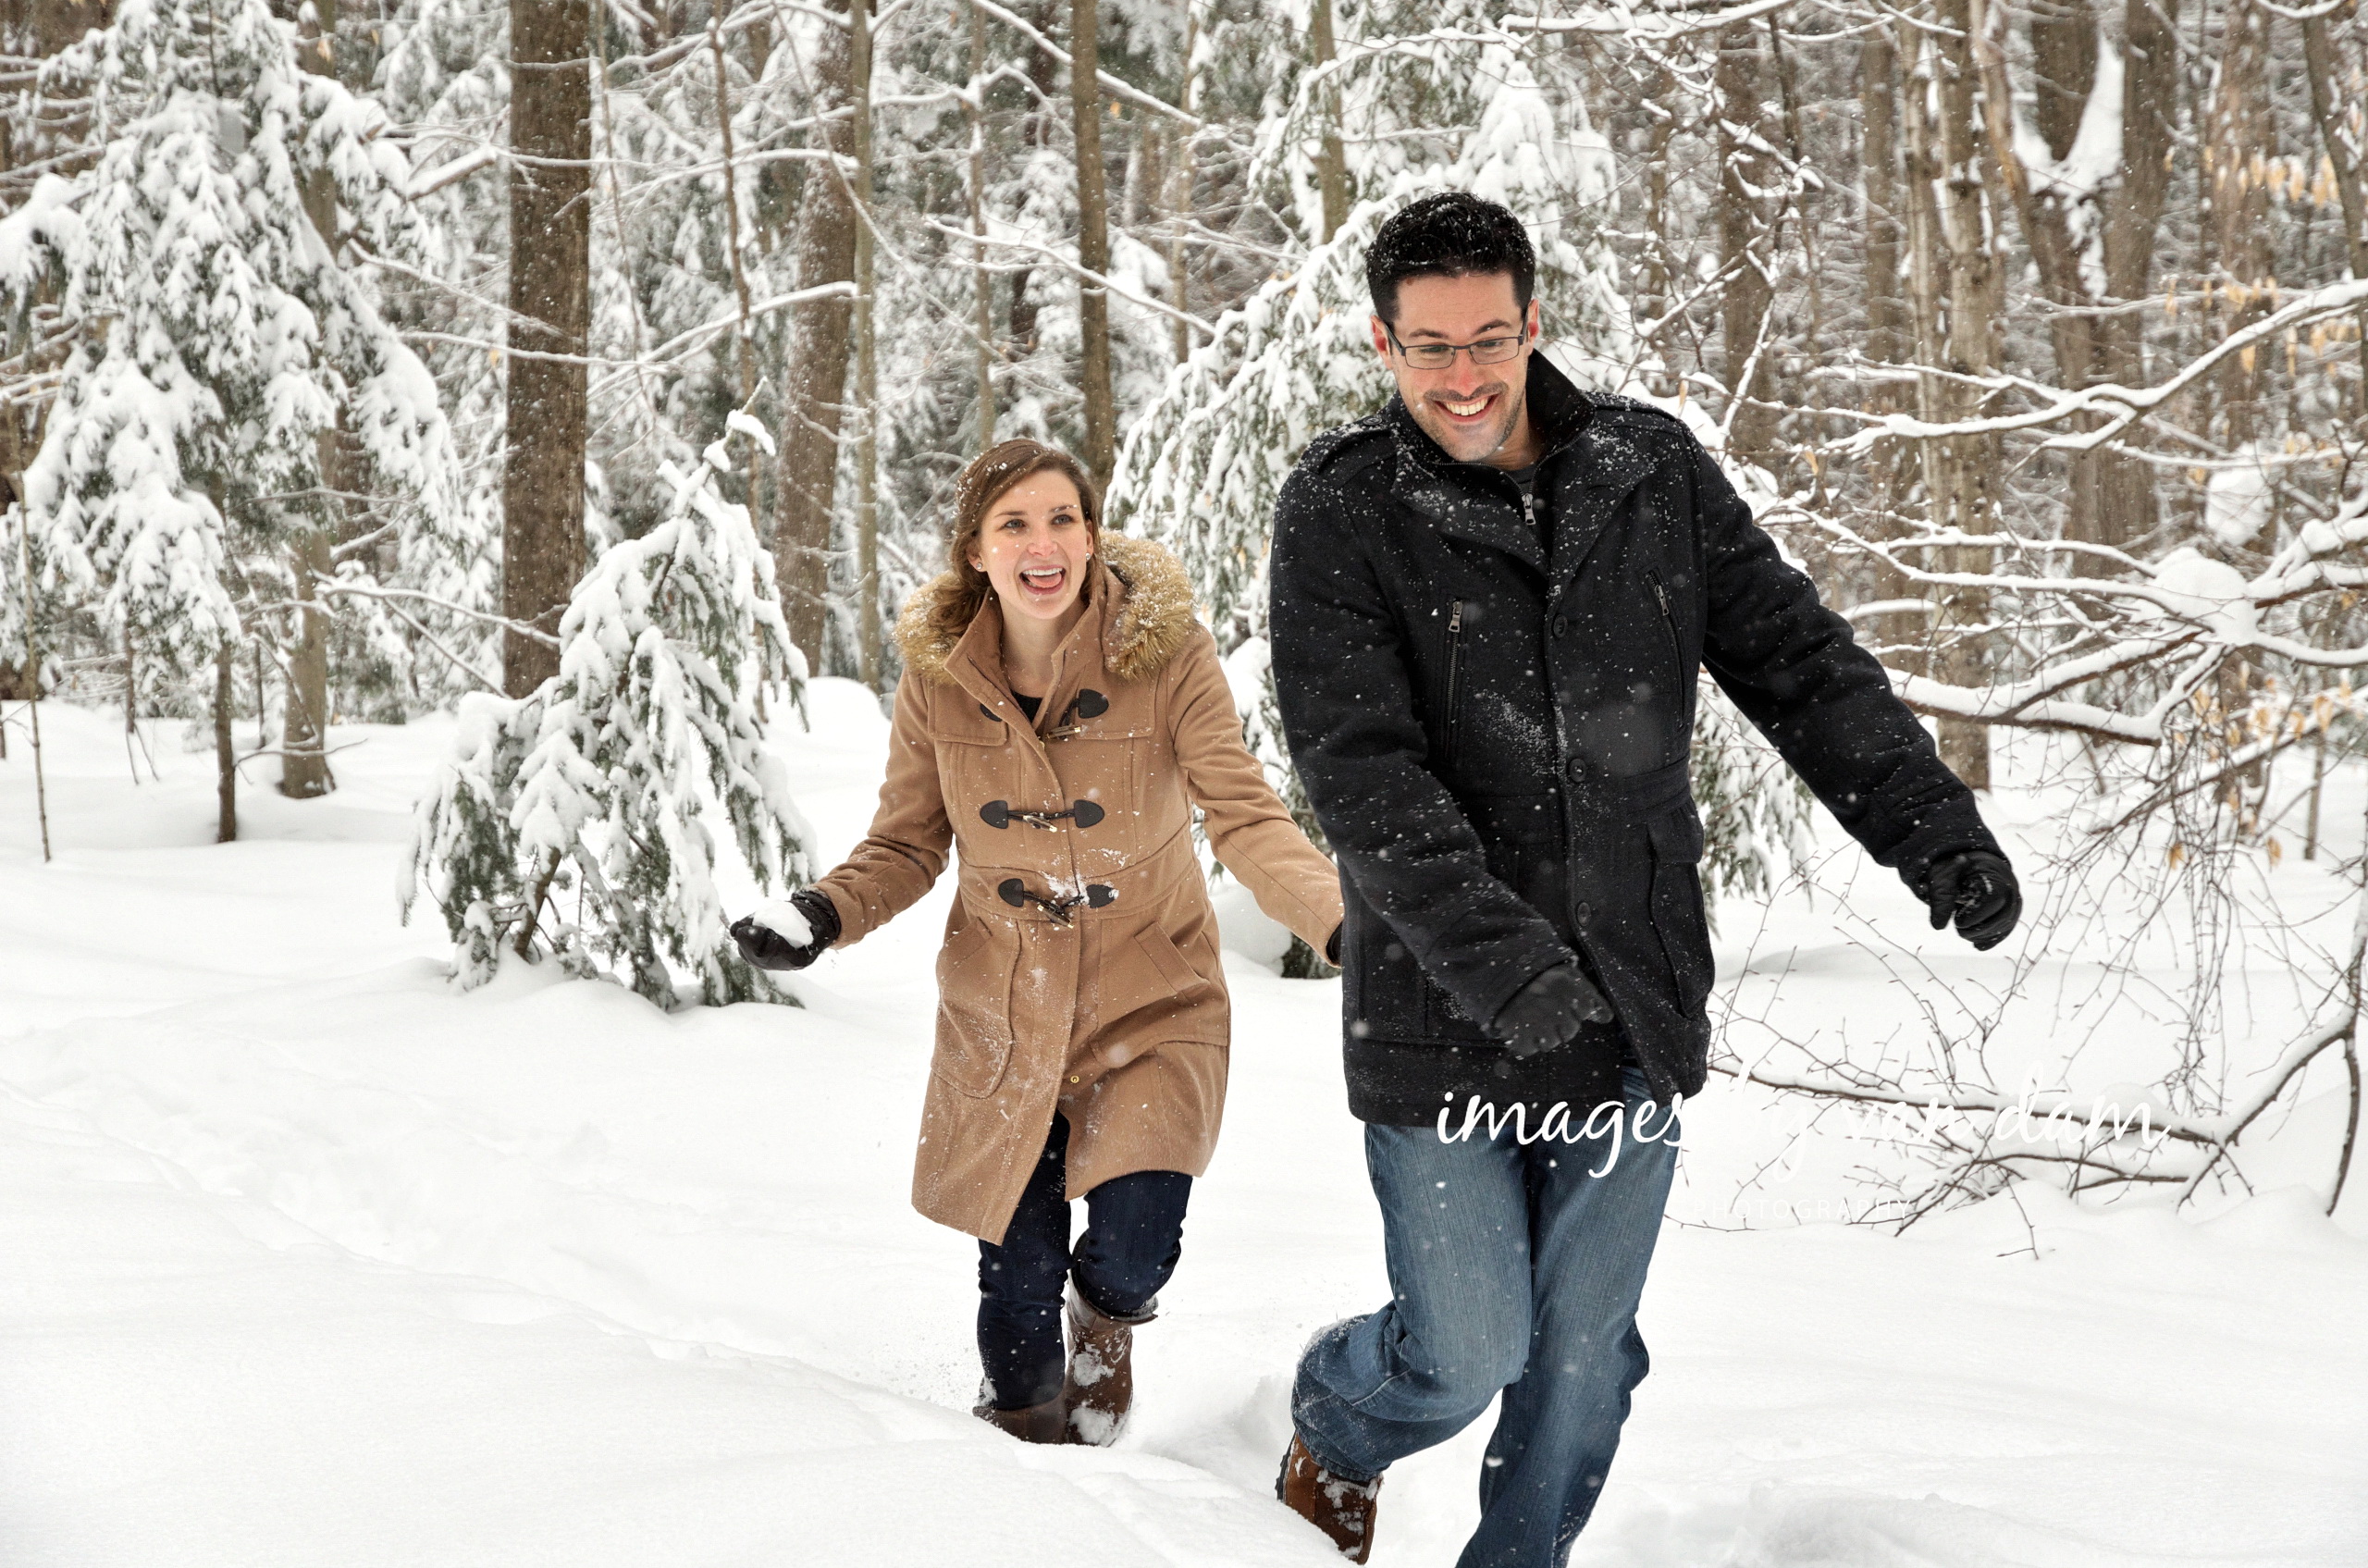 A young woman chases her fiancé with a snowball in a wintery forest